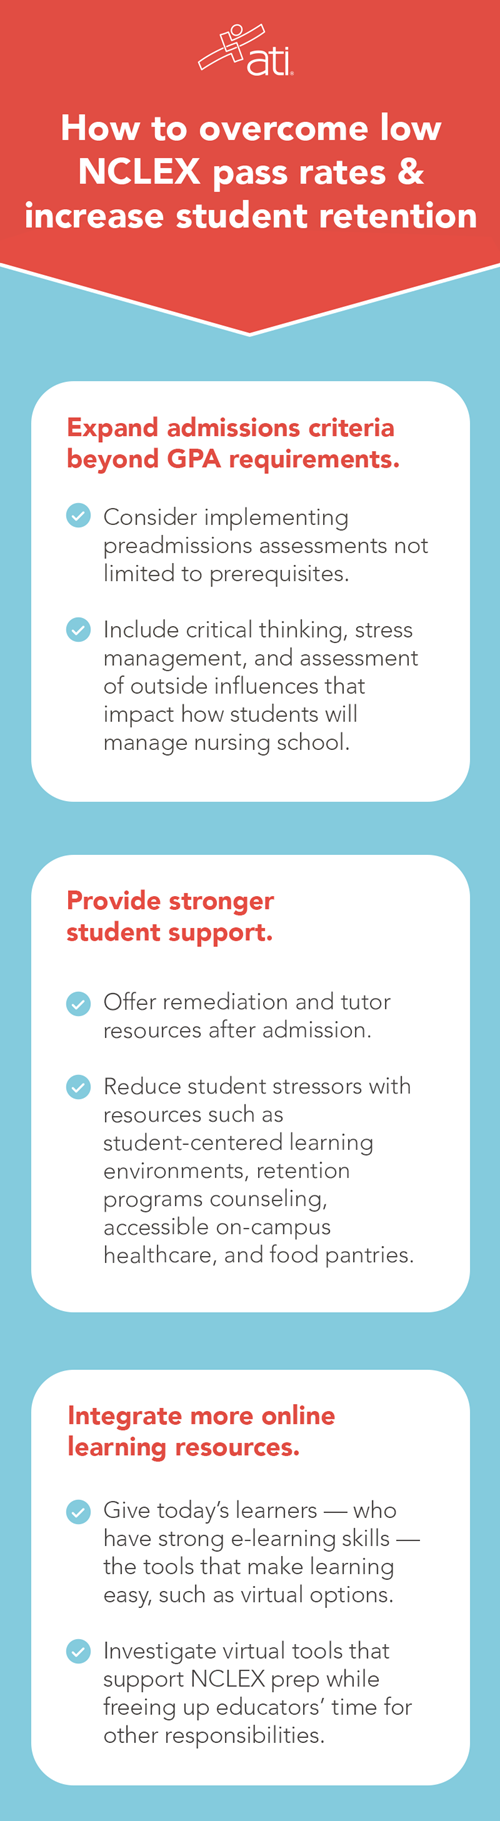 How to increase student retention and NCLEX pass rates